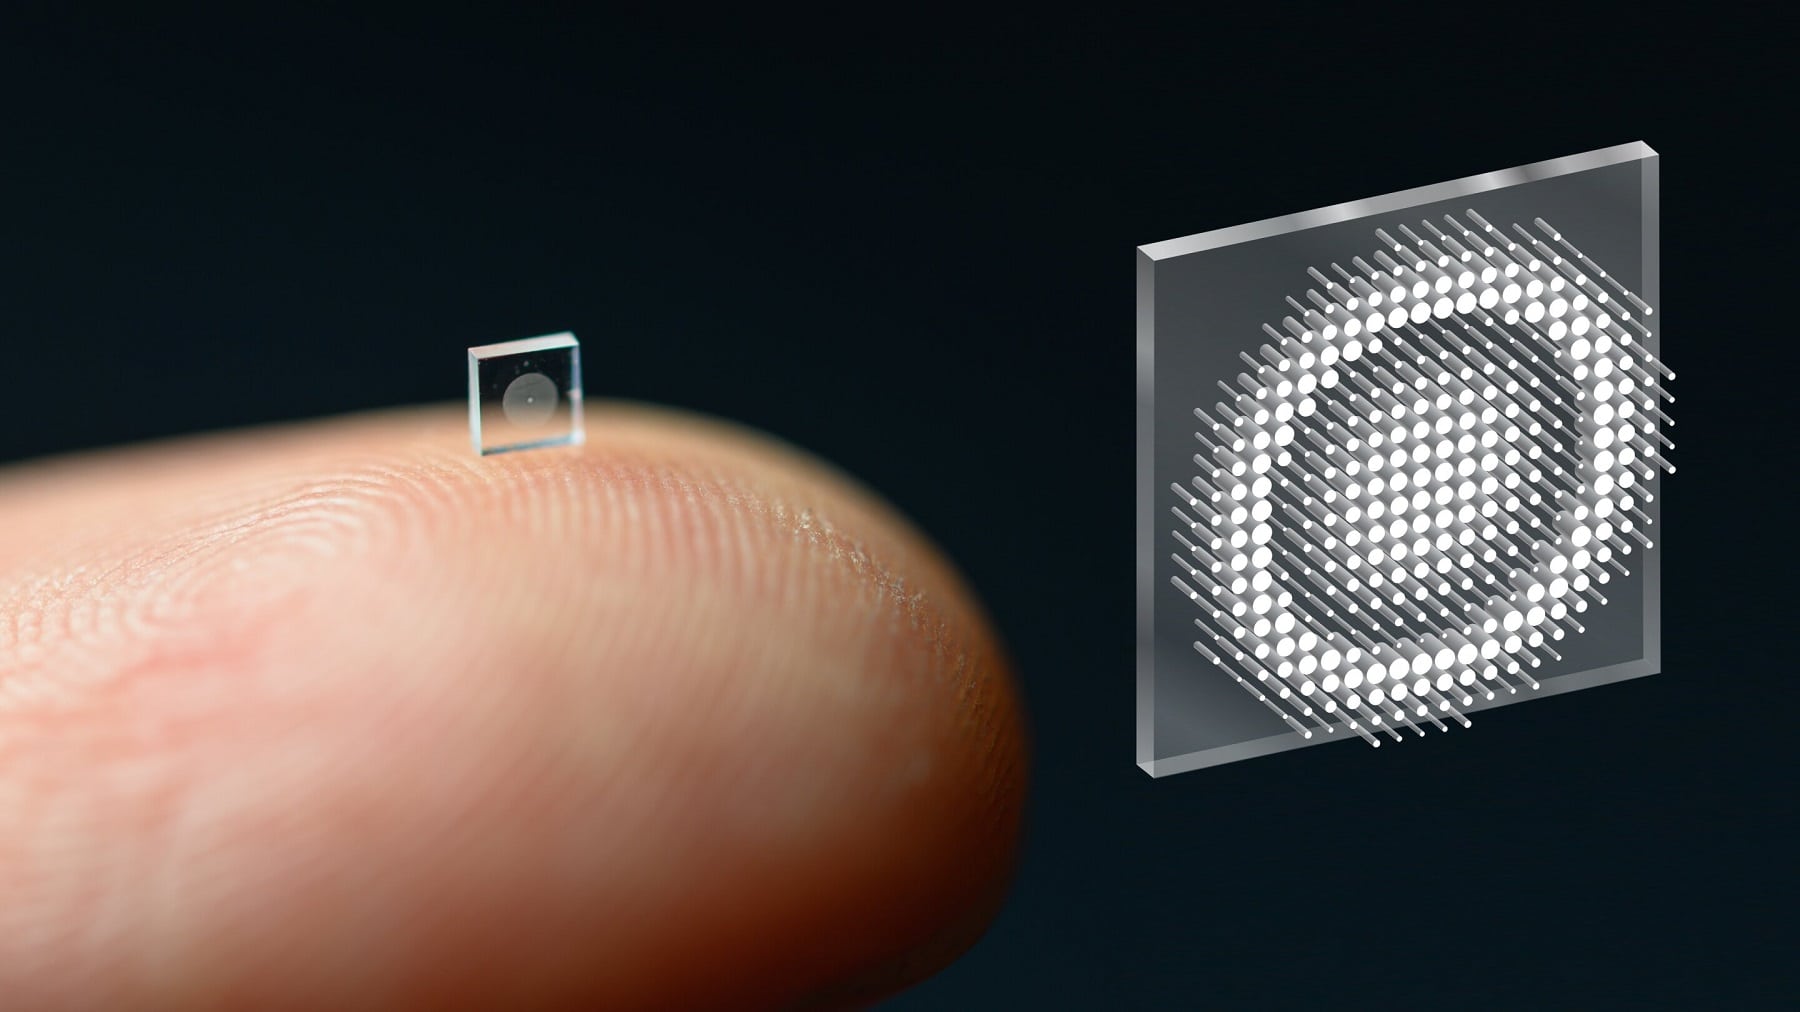 A camera the size of a grain of salt